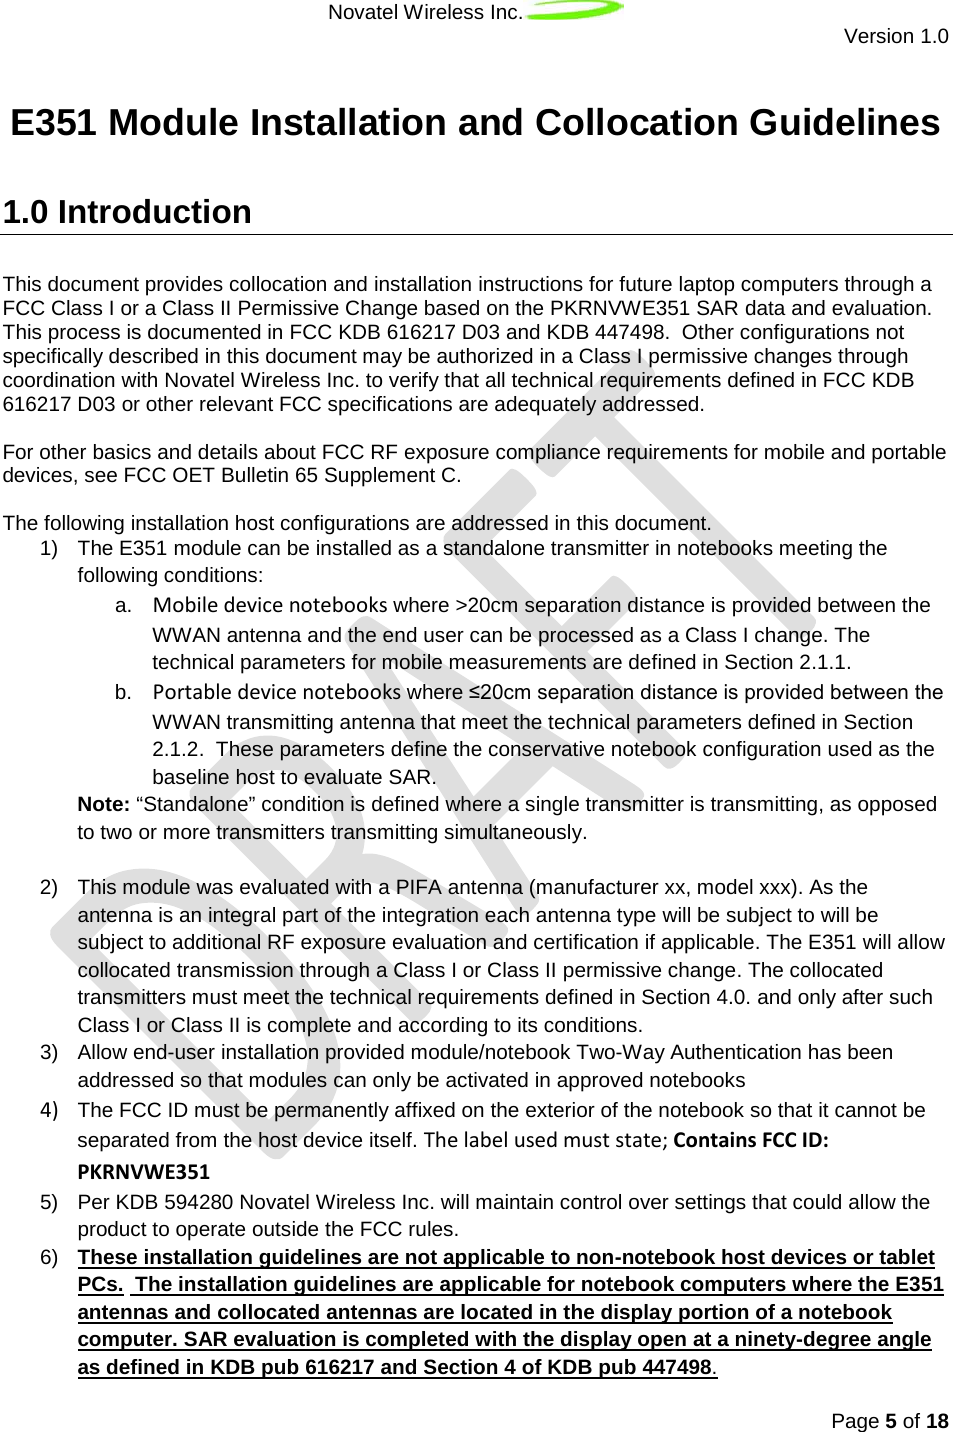 Novatel Wireless Inc.  Version 1.0   Page 5 of 18  E351 Module Installation and Collocation Guidelines   1.0 Introduction This document provides collocation and installation instructions for future laptop computers through a FCC Class I or a Class II Permissive Change based on the PKRNVWE351 SAR data and evaluation. This process is documented in FCC KDB 616217 D03 and KDB 447498.  Other configurations not specifically described in this document may be authorized in a Class I permissive changes through coordination with Novatel Wireless Inc. to verify that all technical requirements defined in FCC KDB 616217 D03 or other relevant FCC specifications are adequately addressed.  For other basics and details about FCC RF exposure compliance requirements for mobile and portable devices, see FCC OET Bulletin 65 Supplement C.  The following installation host configurations are addressed in this document.  1) The E351 module can be installed as a standalone transmitter in notebooks meeting the following conditions: a. Mobile device notebooks where &gt;20cm separation distance is provided between the WWAN antenna and the end user can be processed as a Class I change. The technical parameters for mobile measurements are defined in Section 2.1.1. b. Portable device notebooks where ≤20cm separation distance is provided between the WWAN transmitting antenna that meet the technical parameters defined in Section 2.1.2.  These parameters define the conservative notebook configuration used as the baseline host to evaluate SAR.   Note: “Standalone” condition is defined where a single transmitter is transmitting, as opposed to two or more transmitters transmitting simultaneously.  2) This module was evaluated with a PIFA antenna (manufacturer xx, model xxx). As the antenna is an integral part of the integration each antenna type will be subject to will be subject to additional RF exposure evaluation and certification if applicable. The E351 will allow collocated transmission through a Class I or Class II permissive change. The collocated transmitters must meet the technical requirements defined in Section 4.0. and only after such Class I or Class II is complete and according to its conditions. 3) Allow end-user installation provided module/notebook Two-Way Authentication has been addressed so that modules can only be activated in approved notebooks 4) The FCC ID must be permanently affixed on the exterior of the notebook so that it cannot be separated from the host device itself. The label used must state; Contains FCC ID: PKRNVWE351 5) Per KDB 594280 Novatel Wireless Inc. will maintain control over settings that could allow the product to operate outside the FCC rules. 6) These installation guidelines are not applicable to non-notebook host devices or tablet PCs.   The installation guidelines are applicable for notebook computers where the E351 antennas and collocated antennas are located in the display portion of a notebook computer. SAR evaluation is completed with the display open at a ninety-degree angle as defined in KDB pub 616217 and Section 4 of KDB pub 447498. 